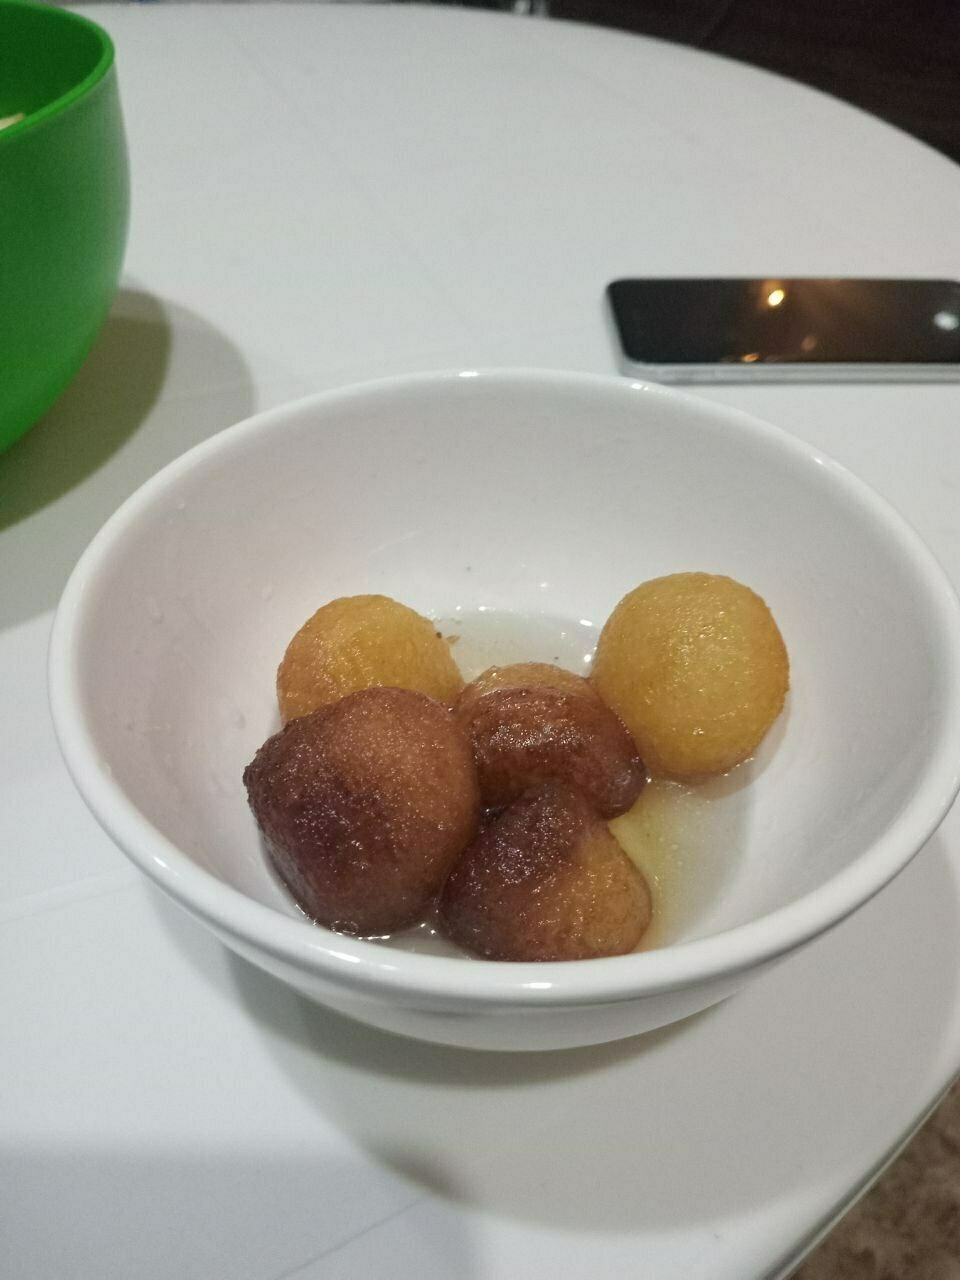 fried balls of dough in a bowl with sugar syrup